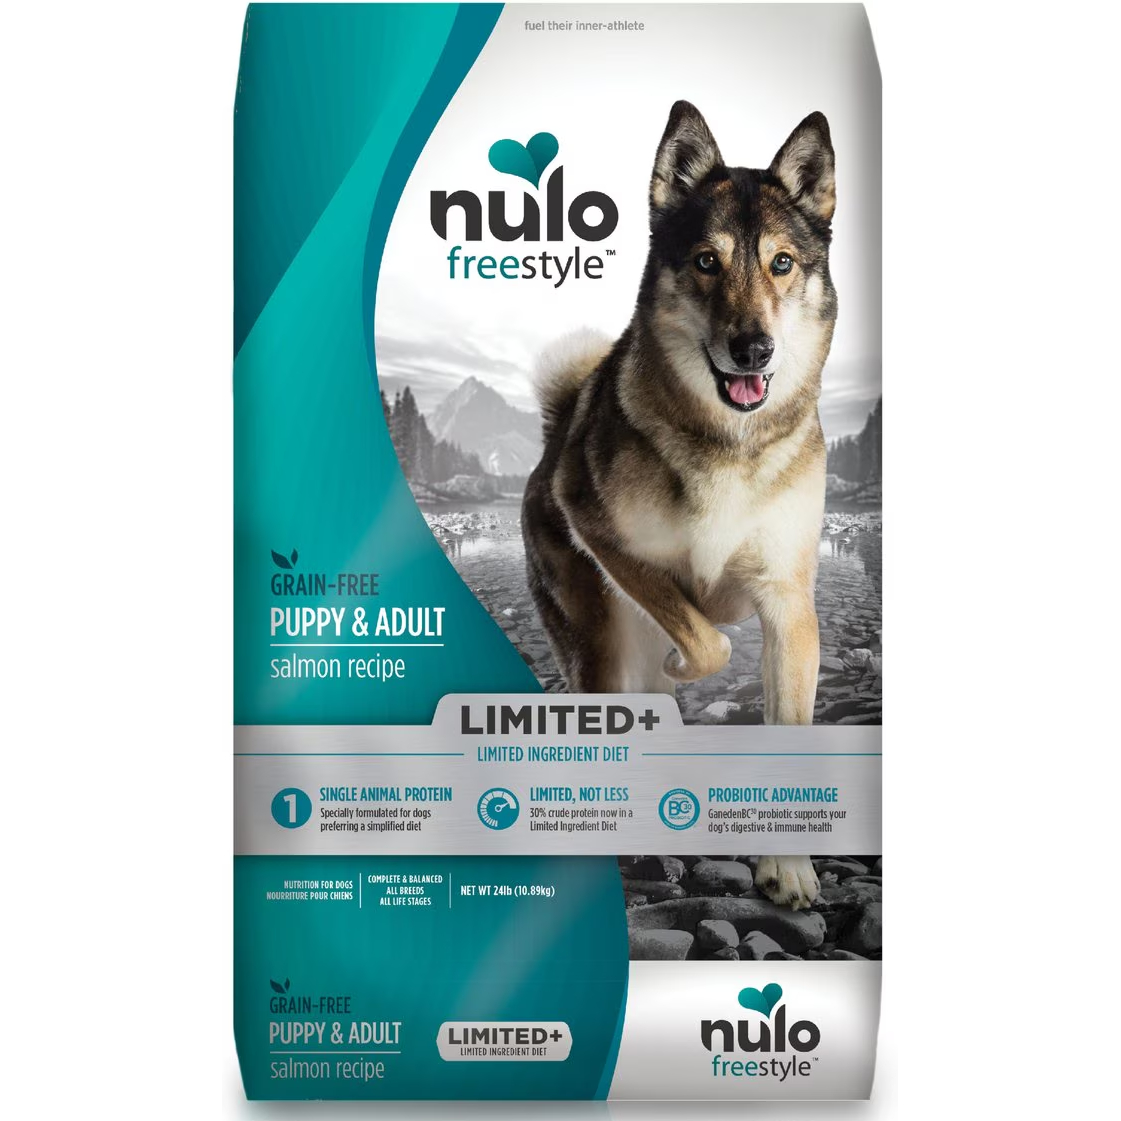 Nulo Freestyle Limited+ Salmon Recipe Grain-Free Puppy & Adult Dry Dog Food 